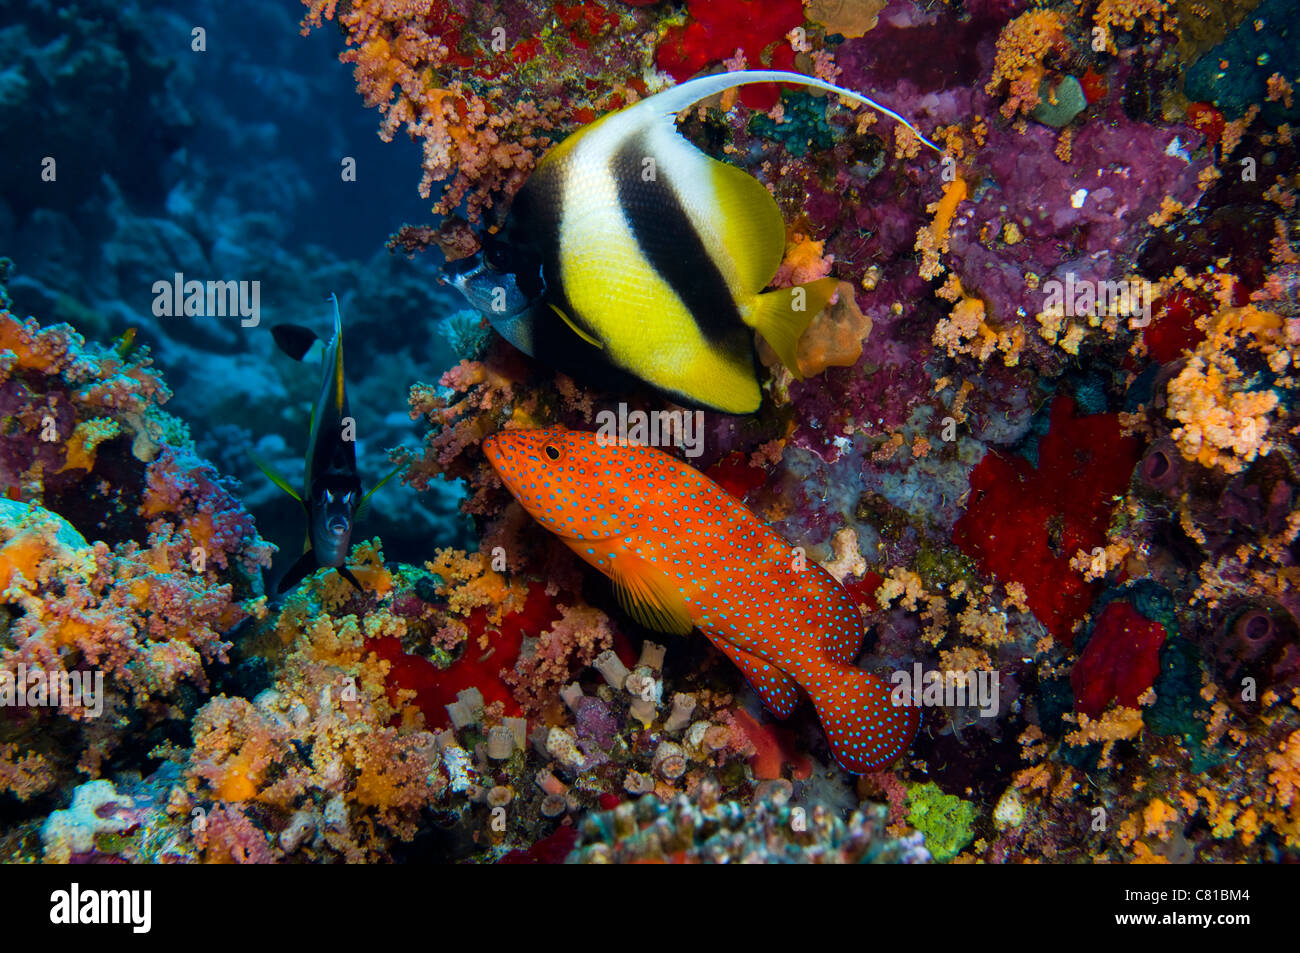 Maldives, underwater sea life and fish, grouper, tropical reef, coral reef, deep, scuba, diving, ocean, sea, Stock Photo